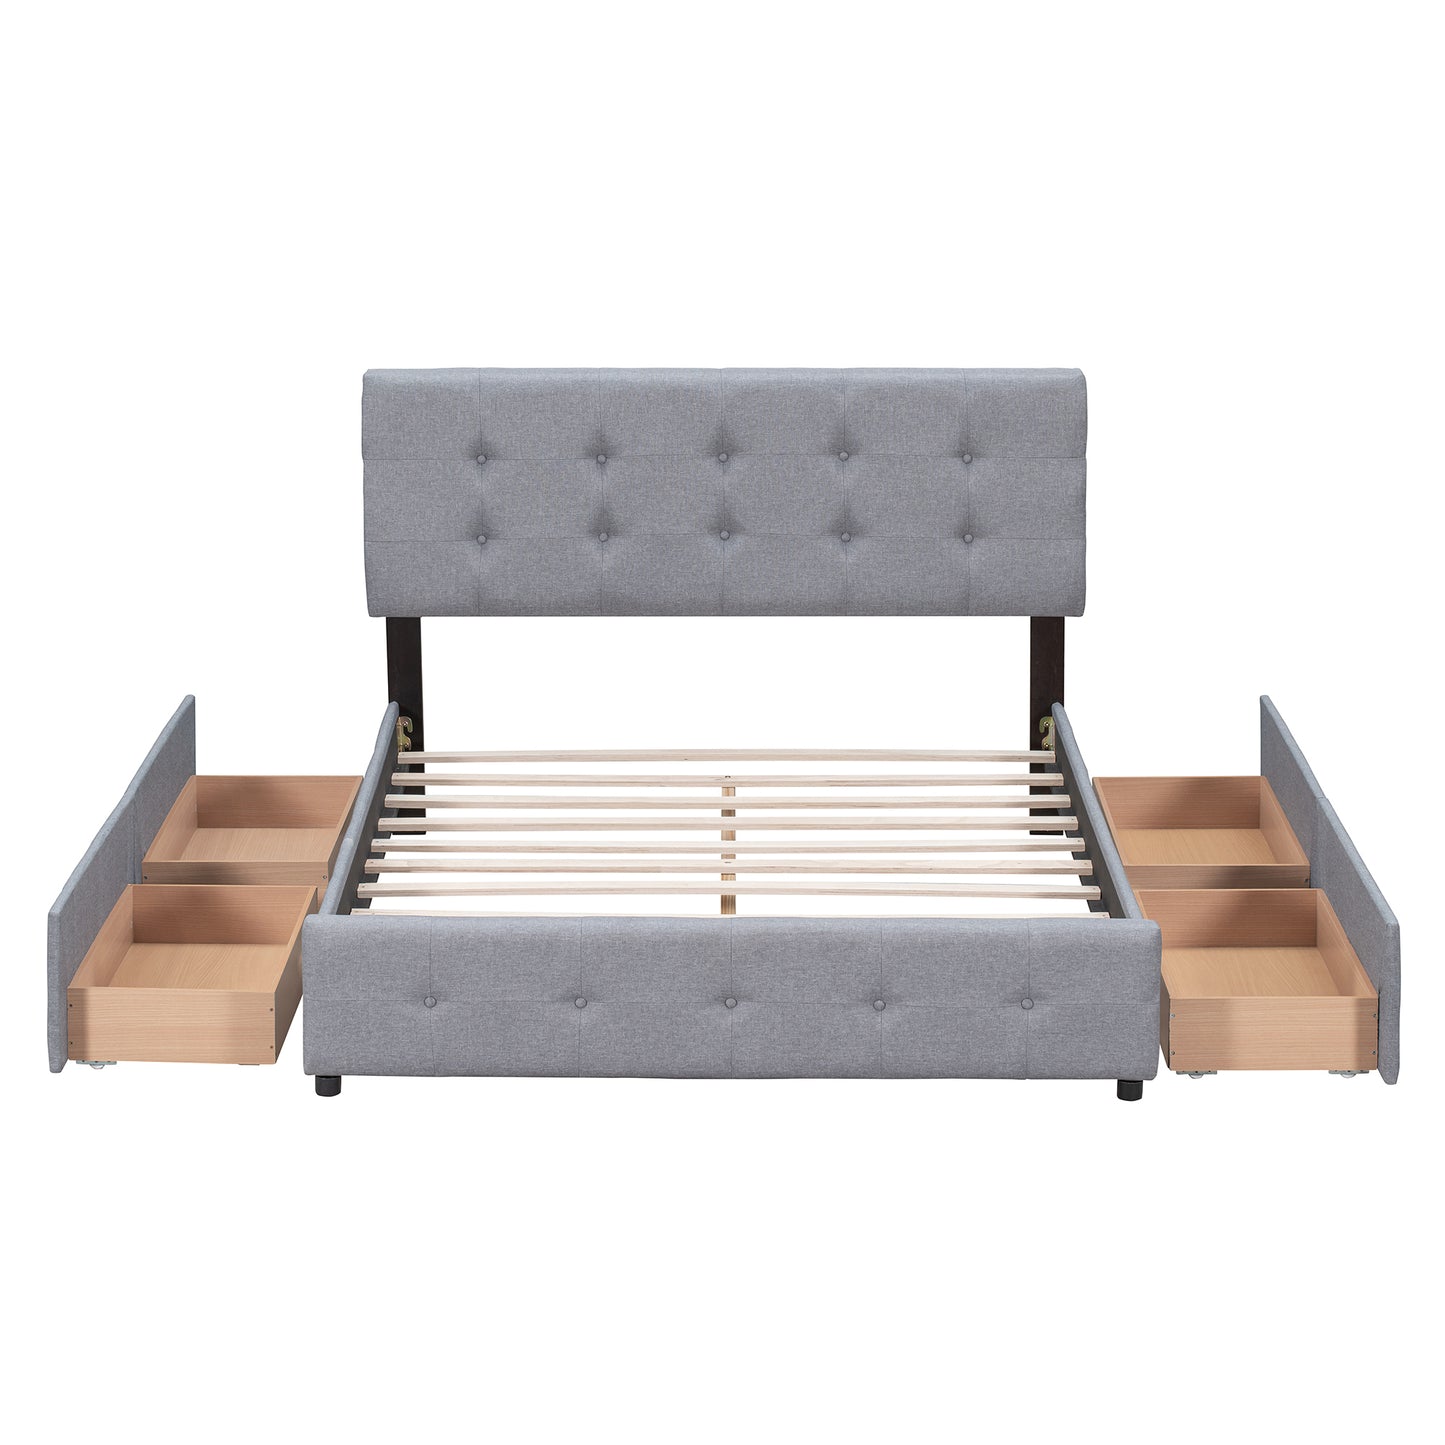 Upholstered Platform Bed with Classic Headboard and 4 Drawers, No Box Spring Needed, Linen Fabric, Queen Size Light Gray